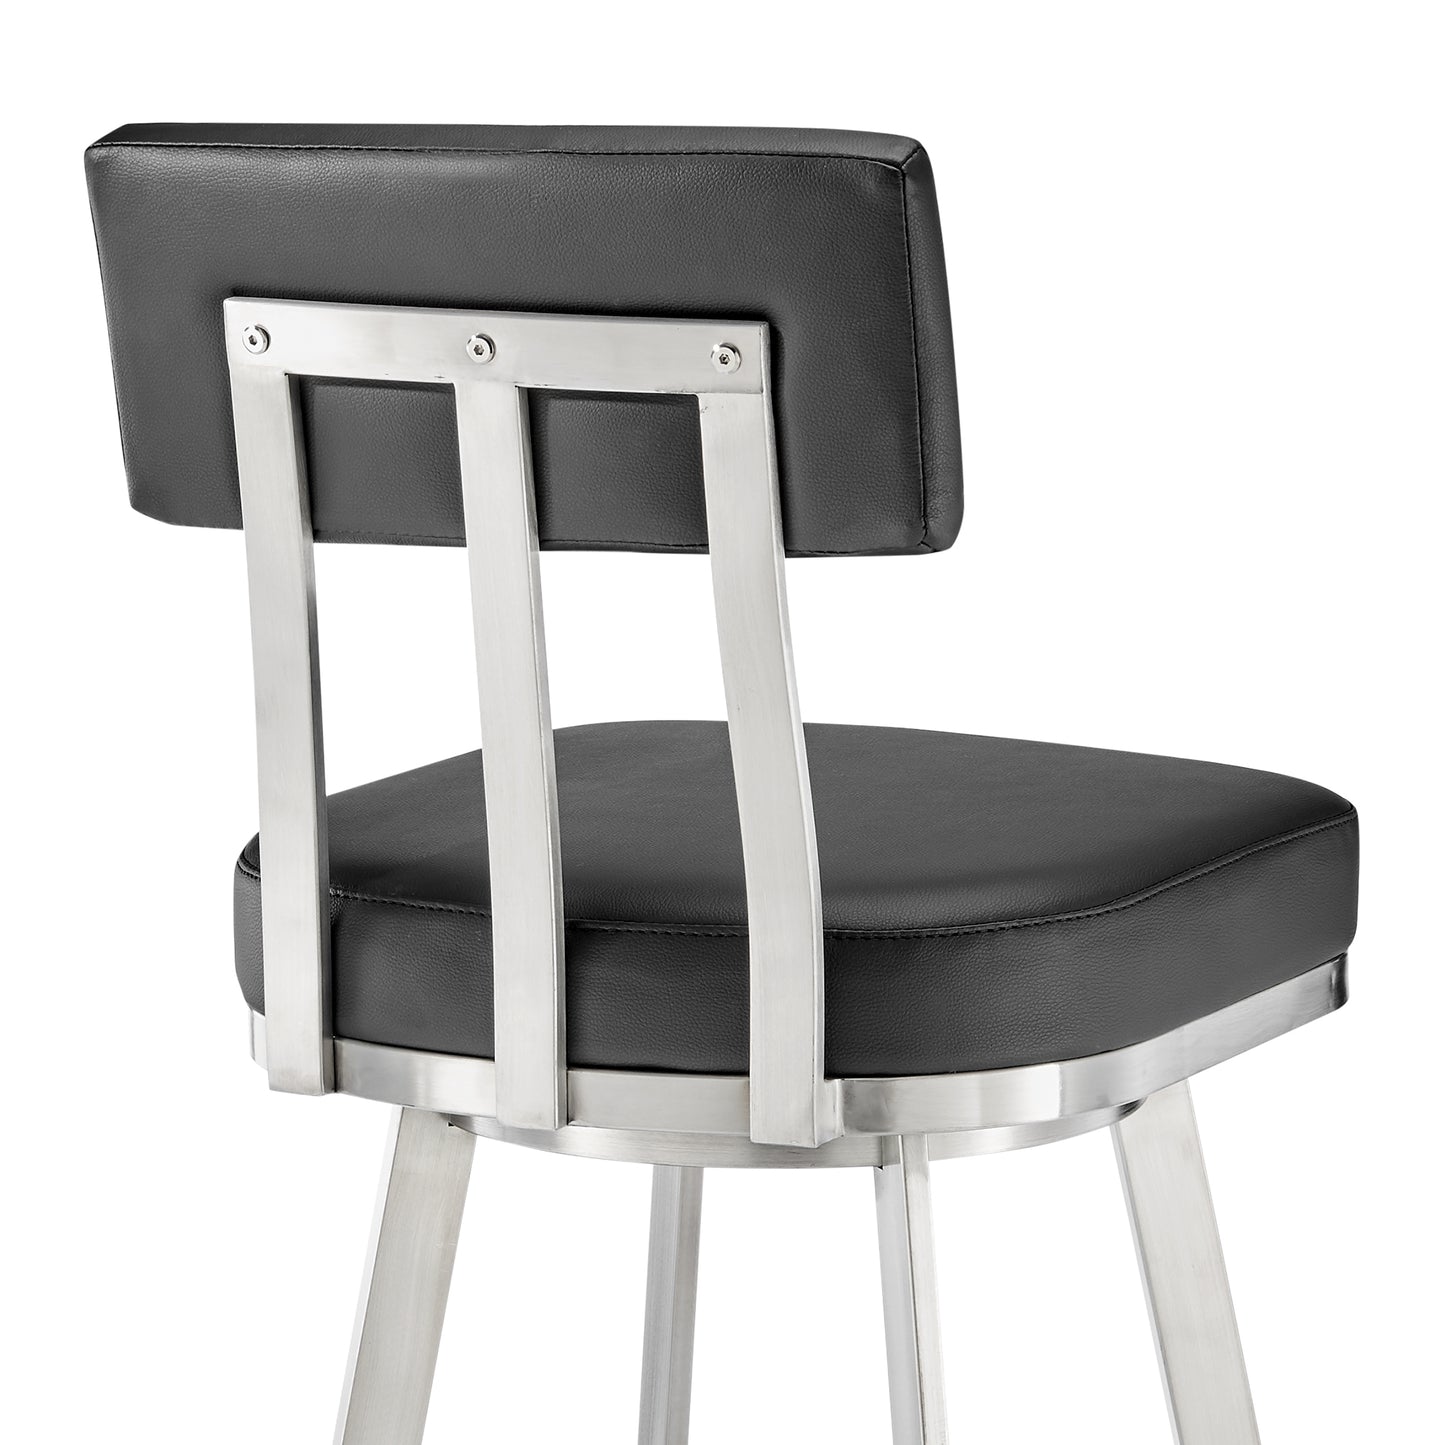 Benjamin 30" Swivel Bar Stool in Brushed Stainless Steel with Black Faux Leather